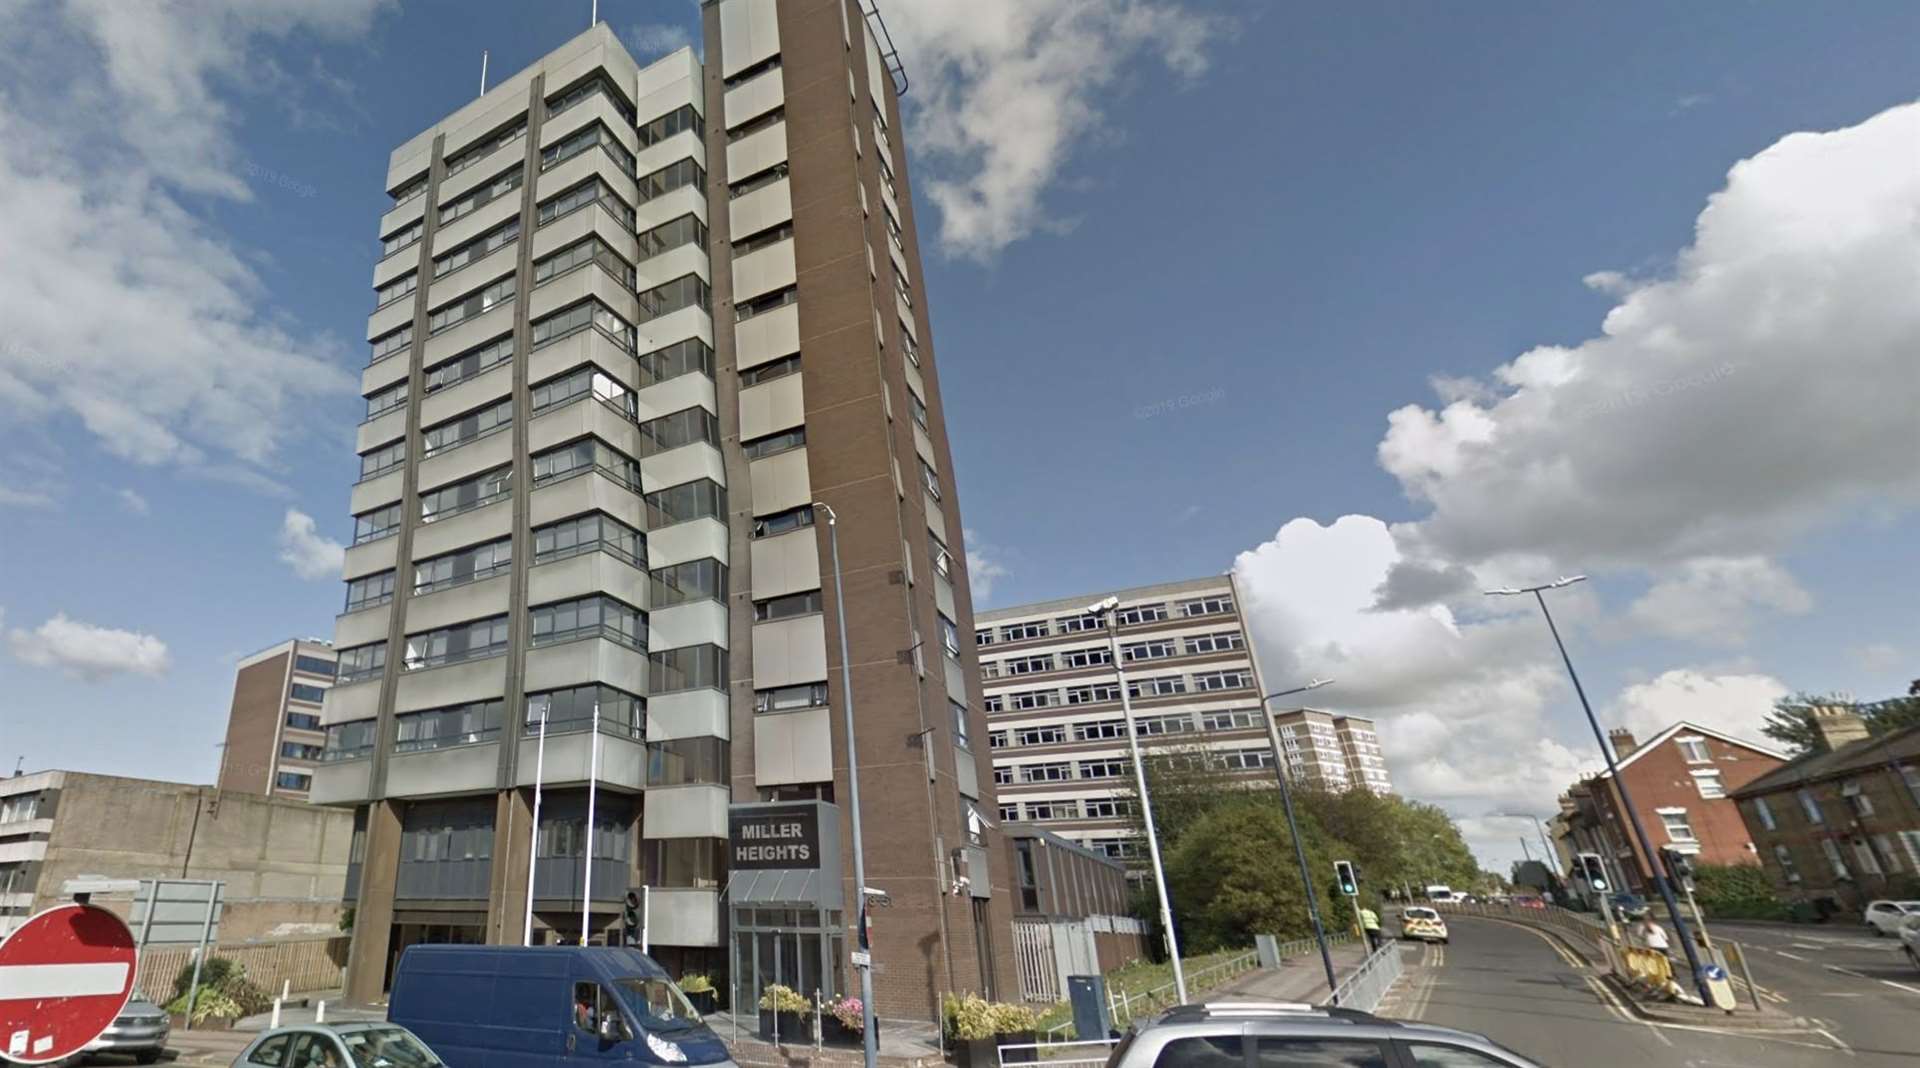 The incident happened on the stairwell of Miller Heights in Lower Stone Street, Maidstone. Picture: Google Street View